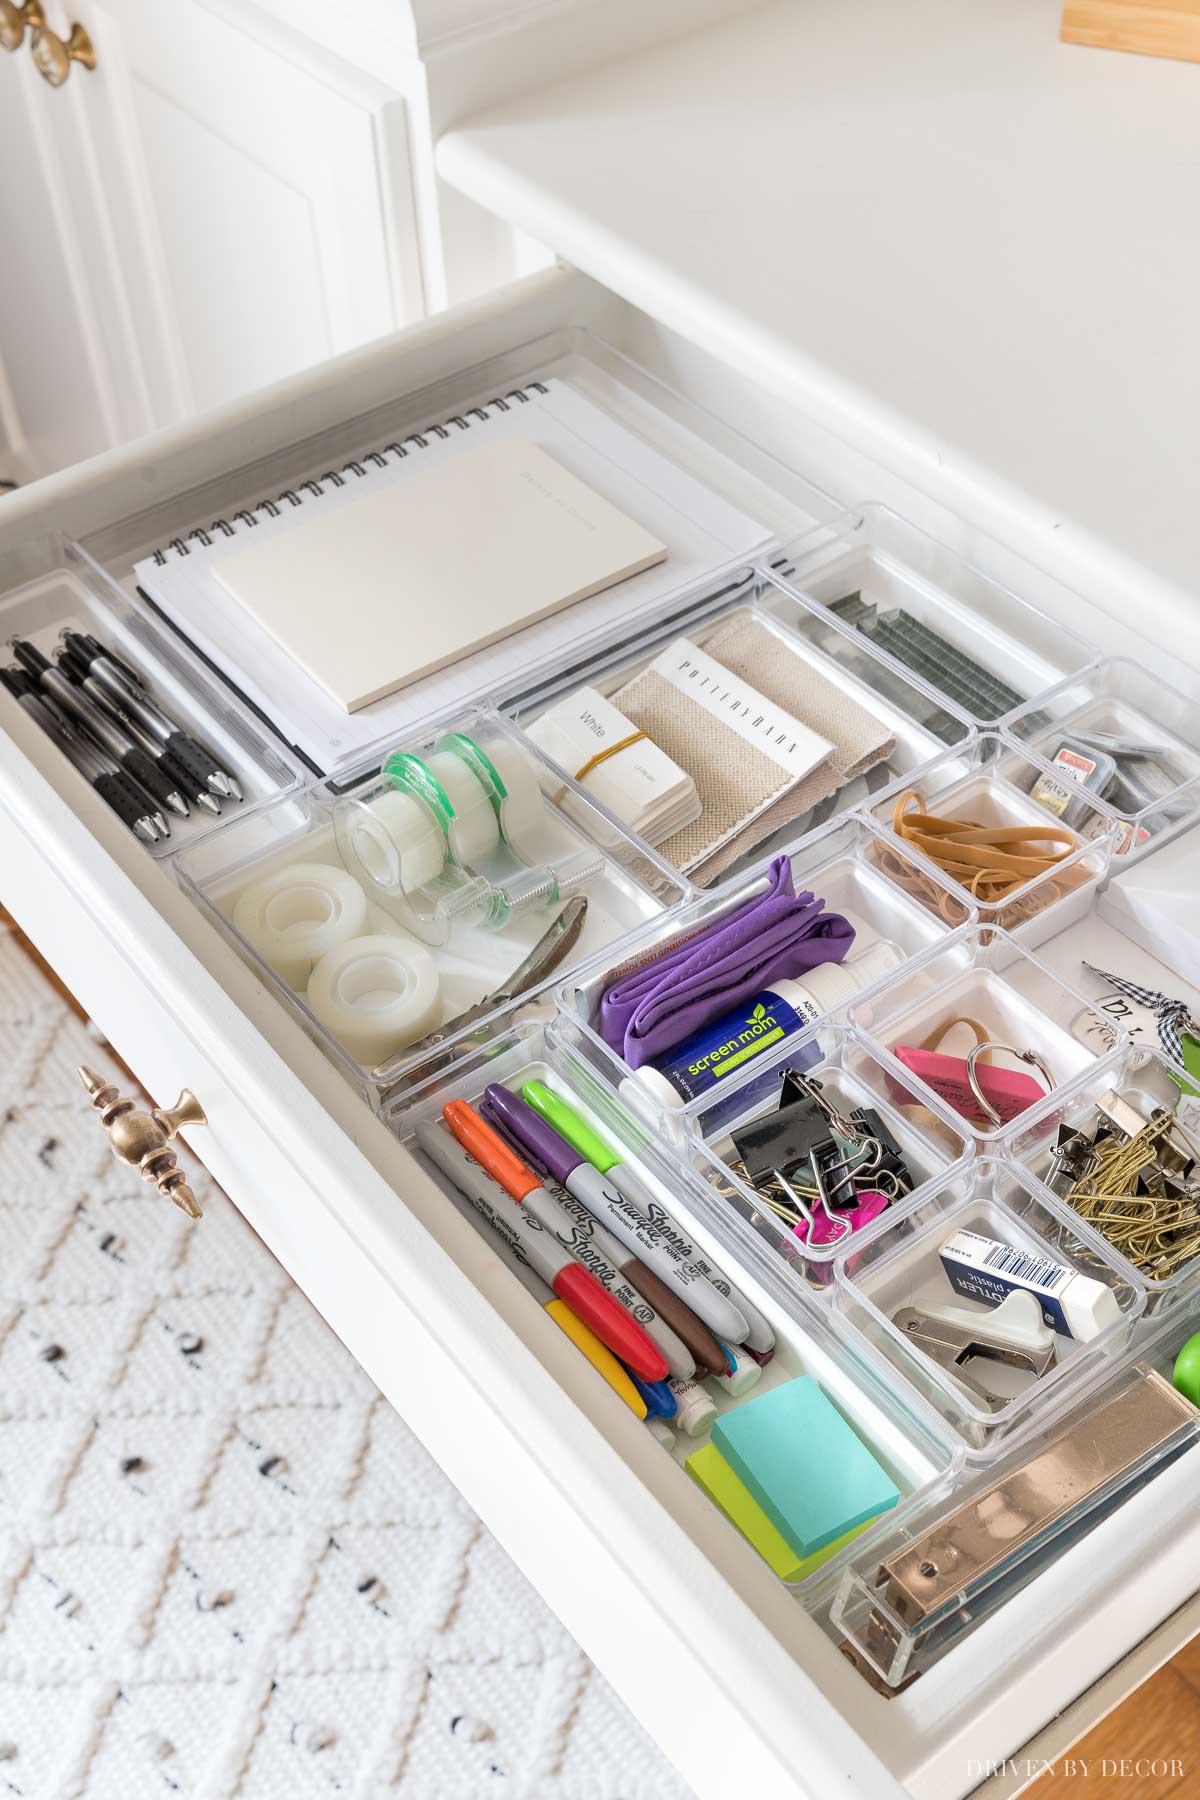 This set of drawer dividers works so well for keeping desk drawers organized - one of the helpful desk organization ideas in this post!